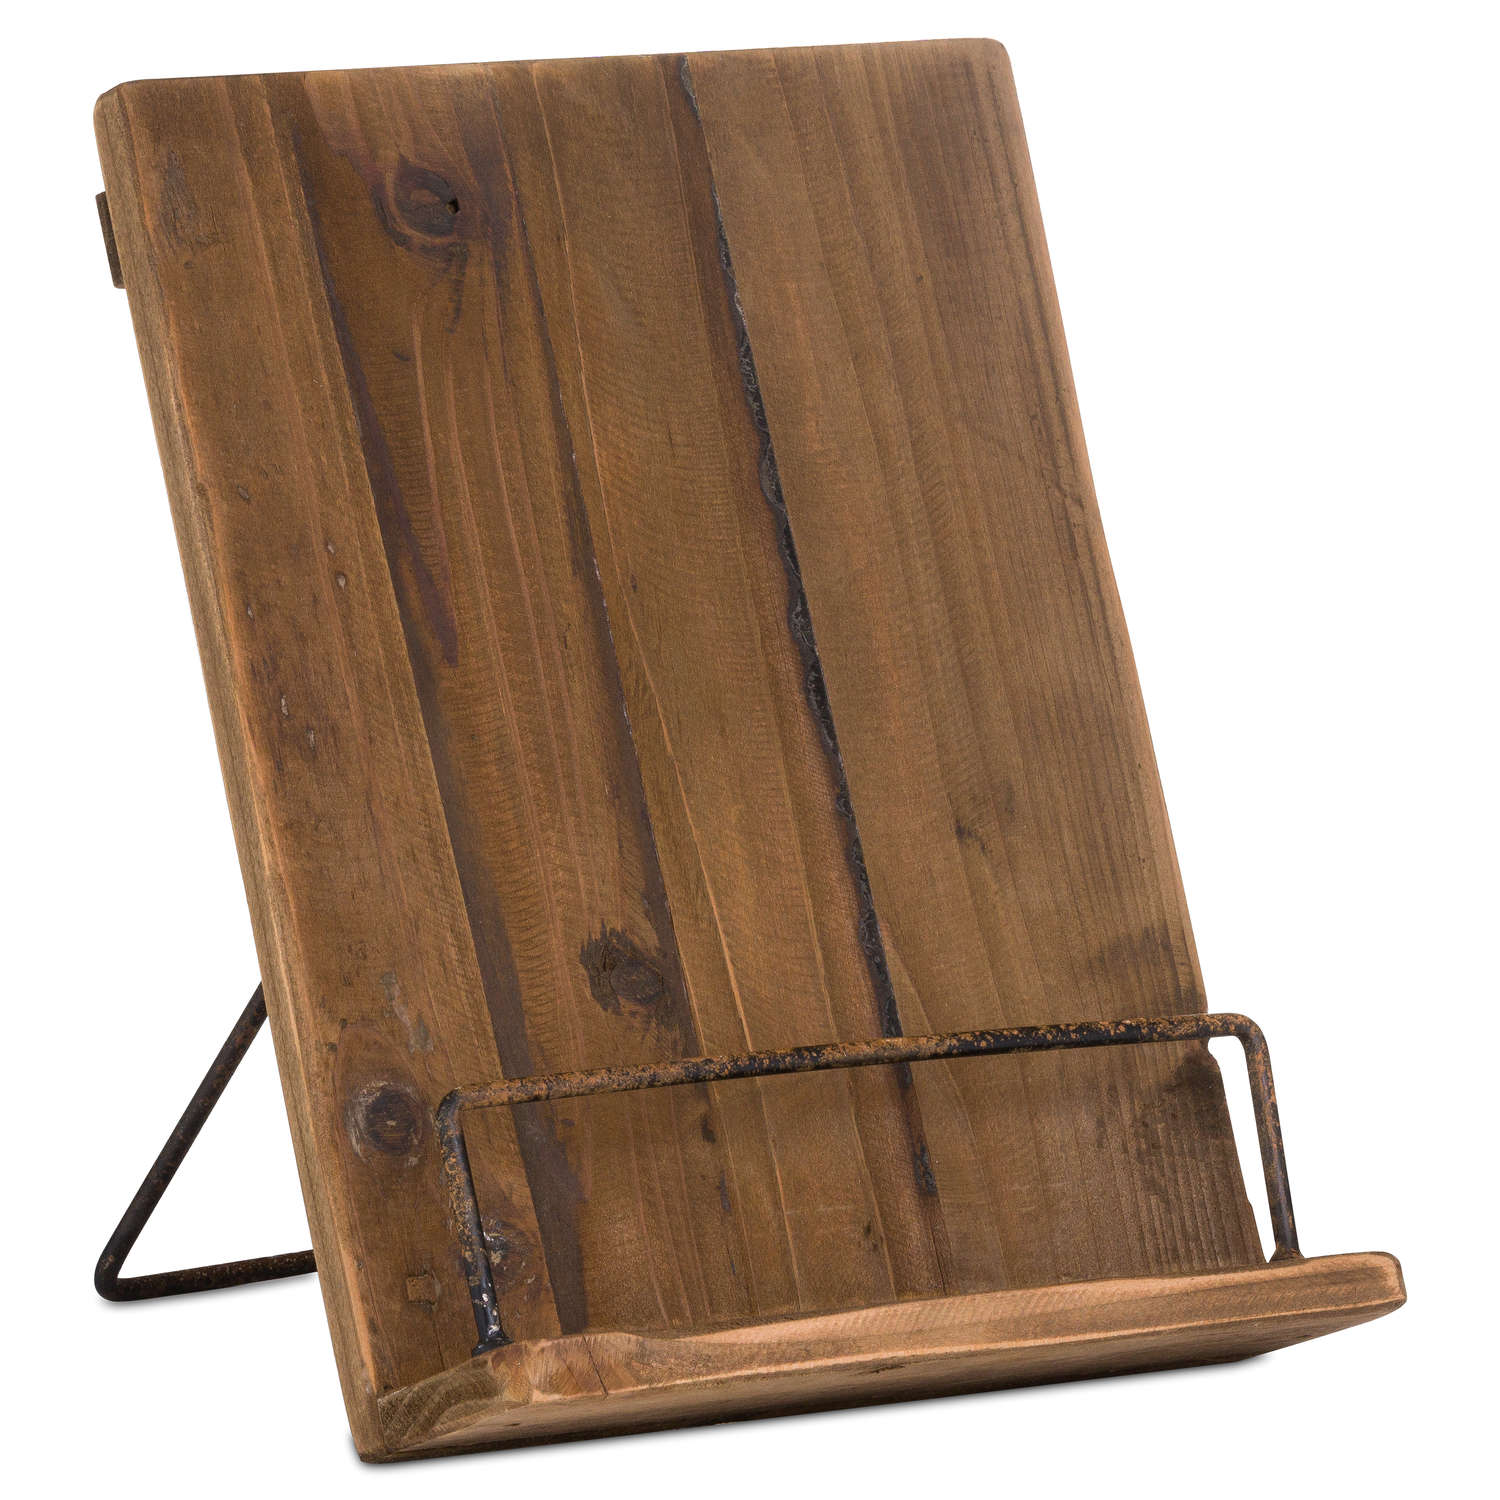 Rustic Display Recipe Book Holder | Wholesale by Hill Interiors